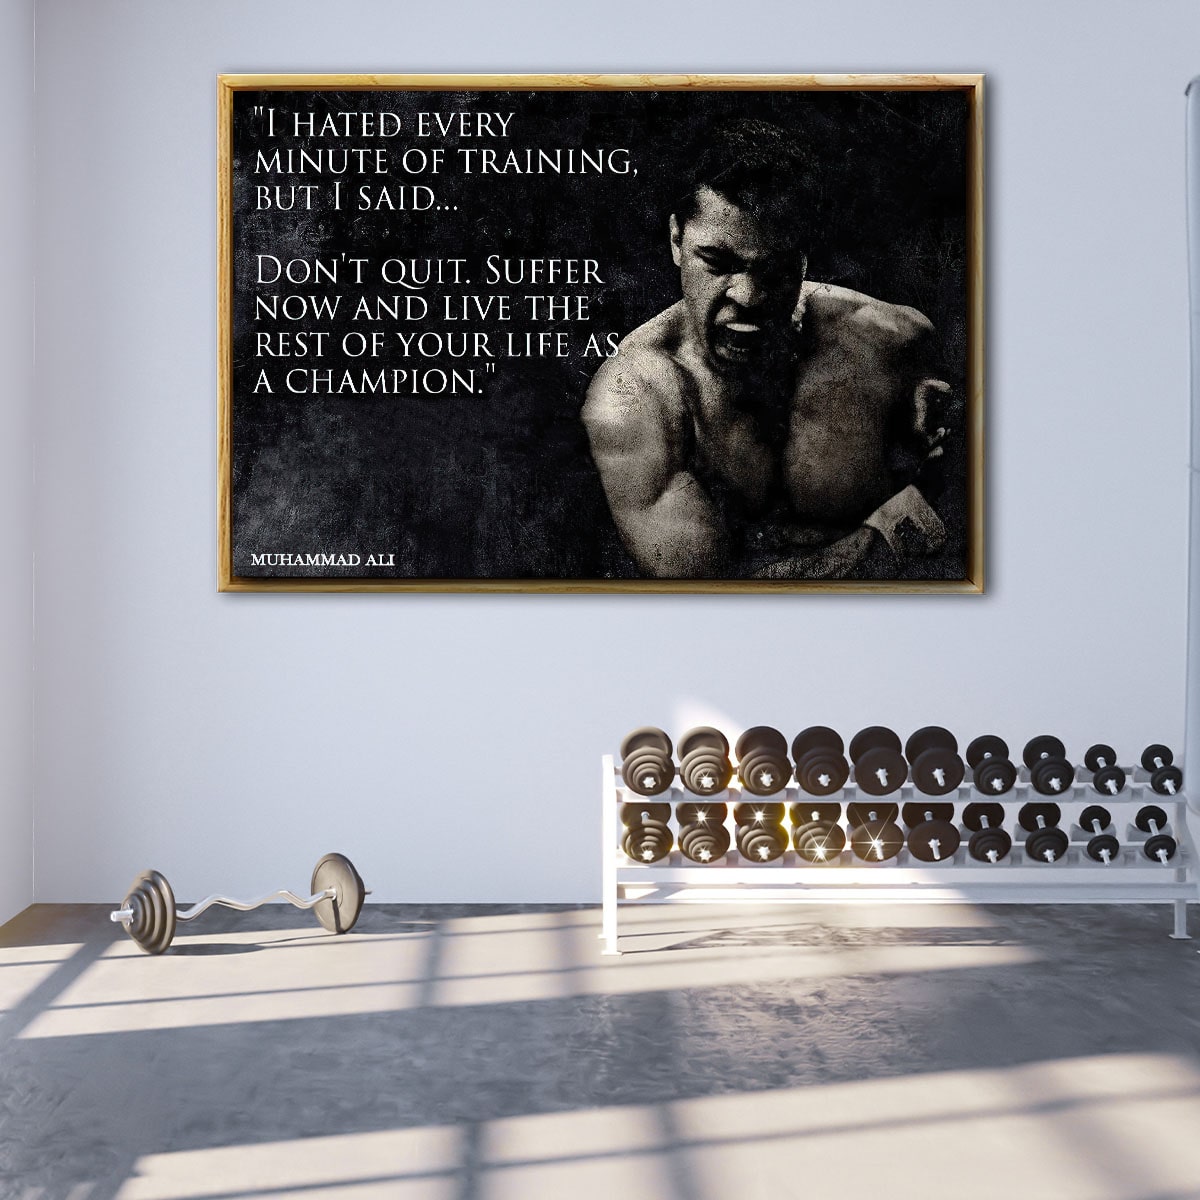 I hated every.. Motivation QUOTE PICTURE in FRAME inspired by Muhammad Ali 